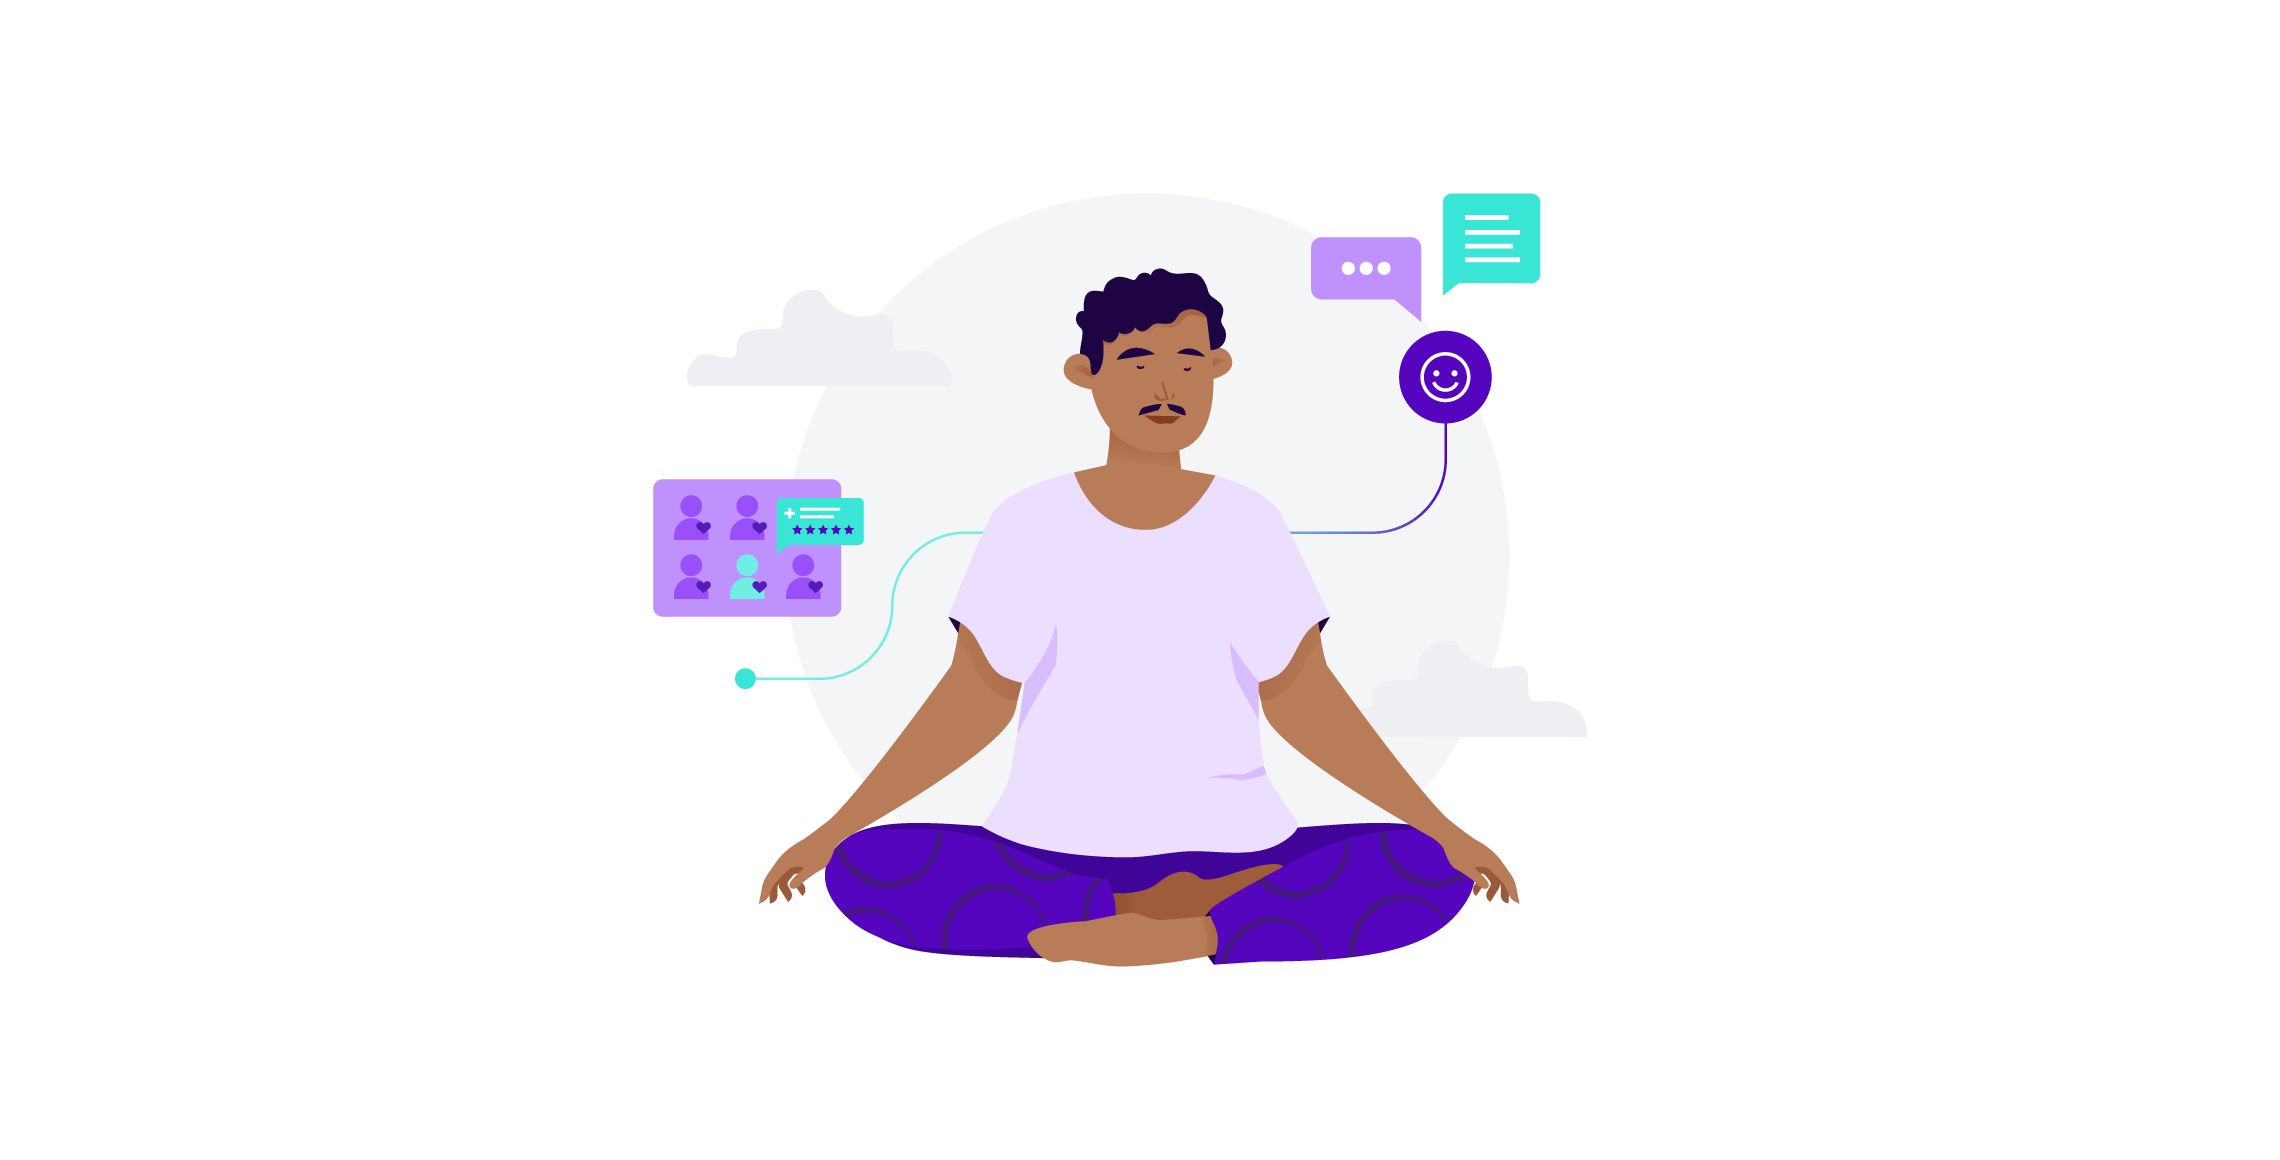 man in a meditating position with a happy icon and 5 star rating for healthcare patient experience